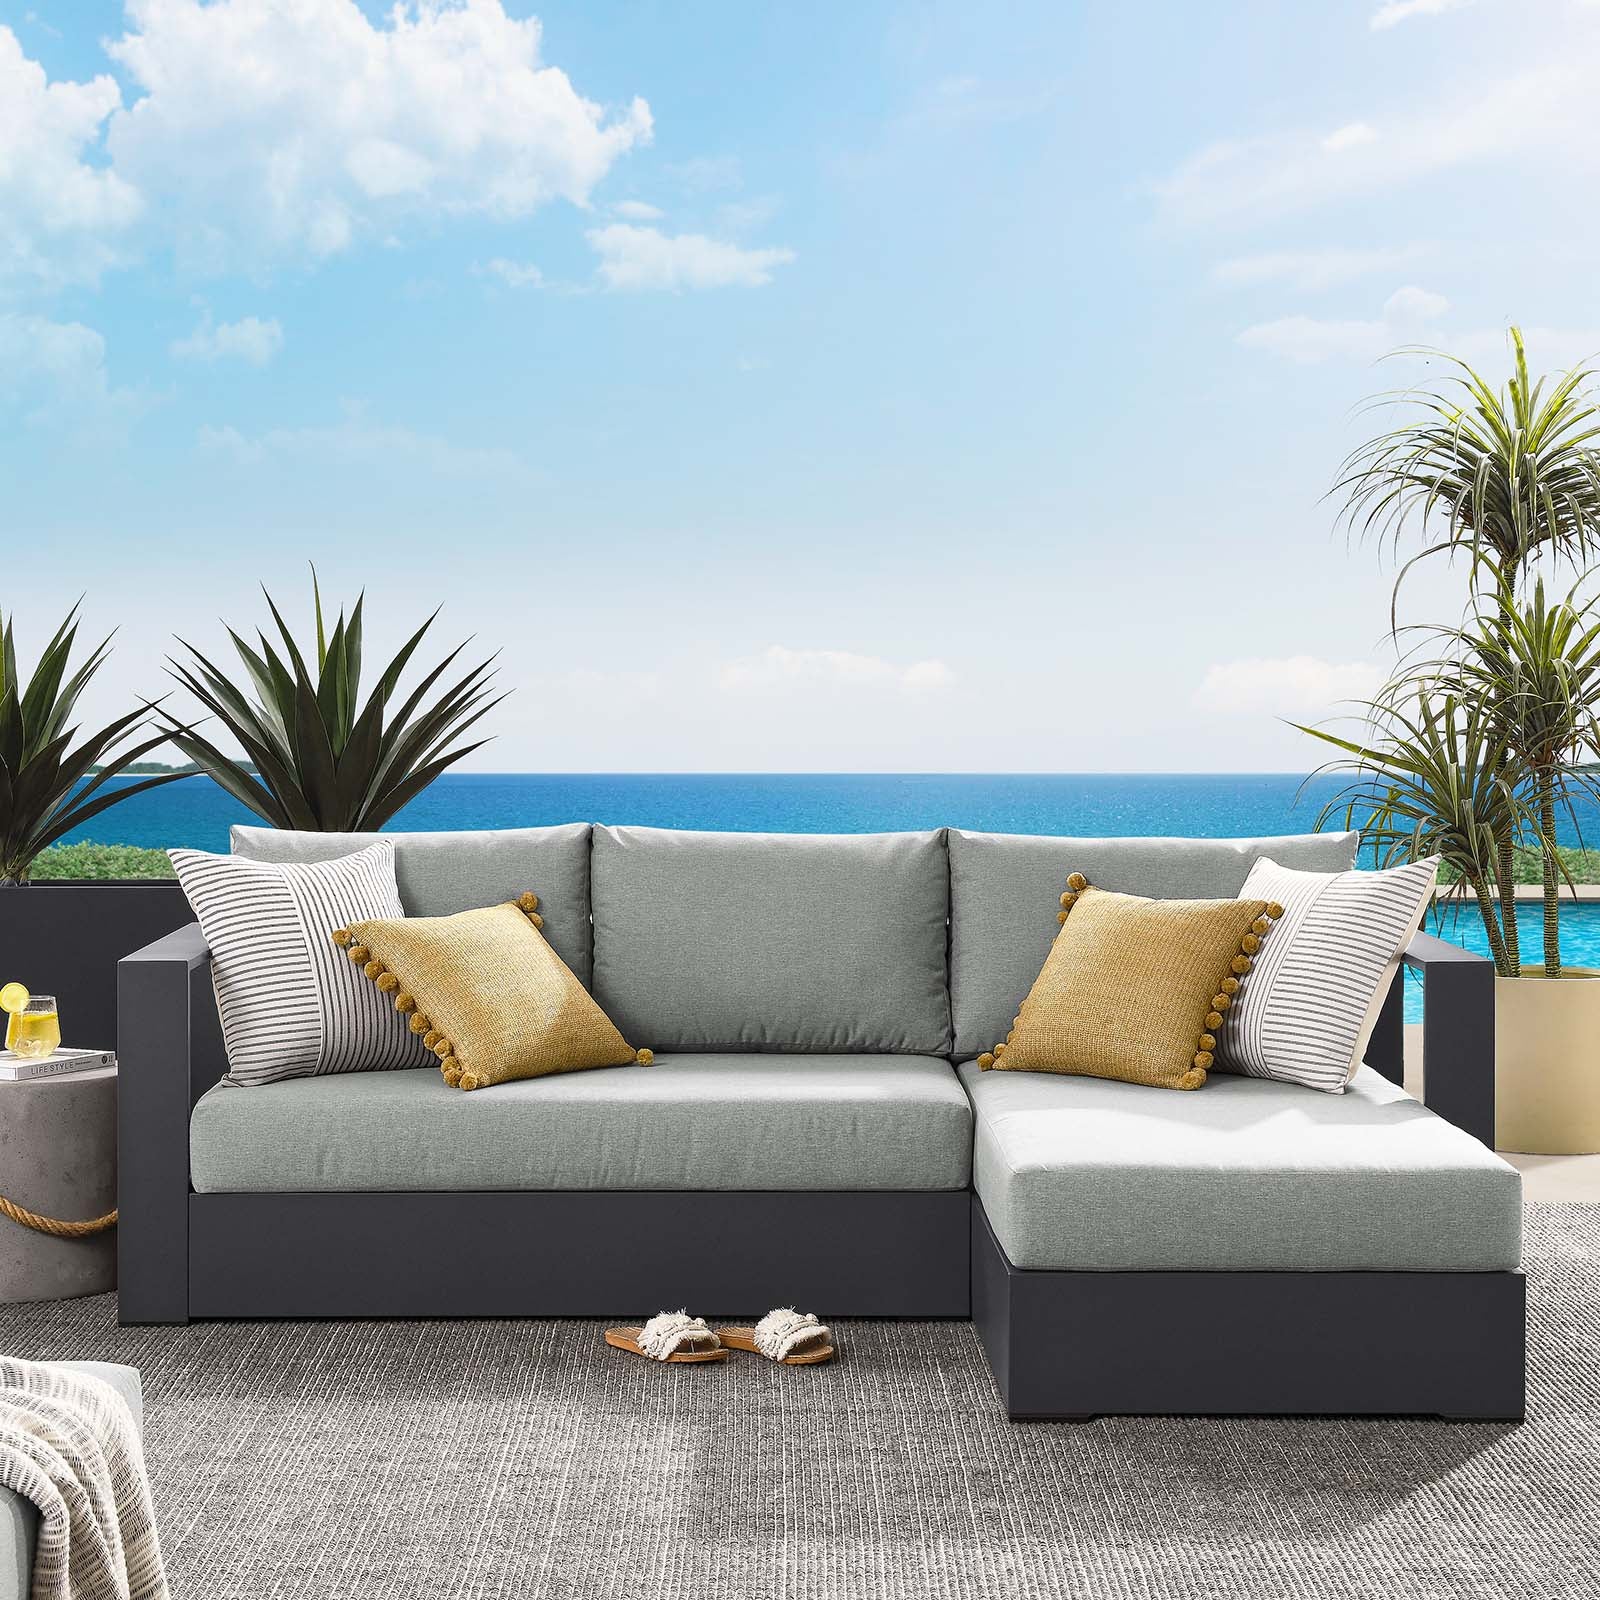 Tahoe Outdoor Patio Powder-Coated Aluminum 2-Piece Right-Facing Chaise Sectional Sofa Set